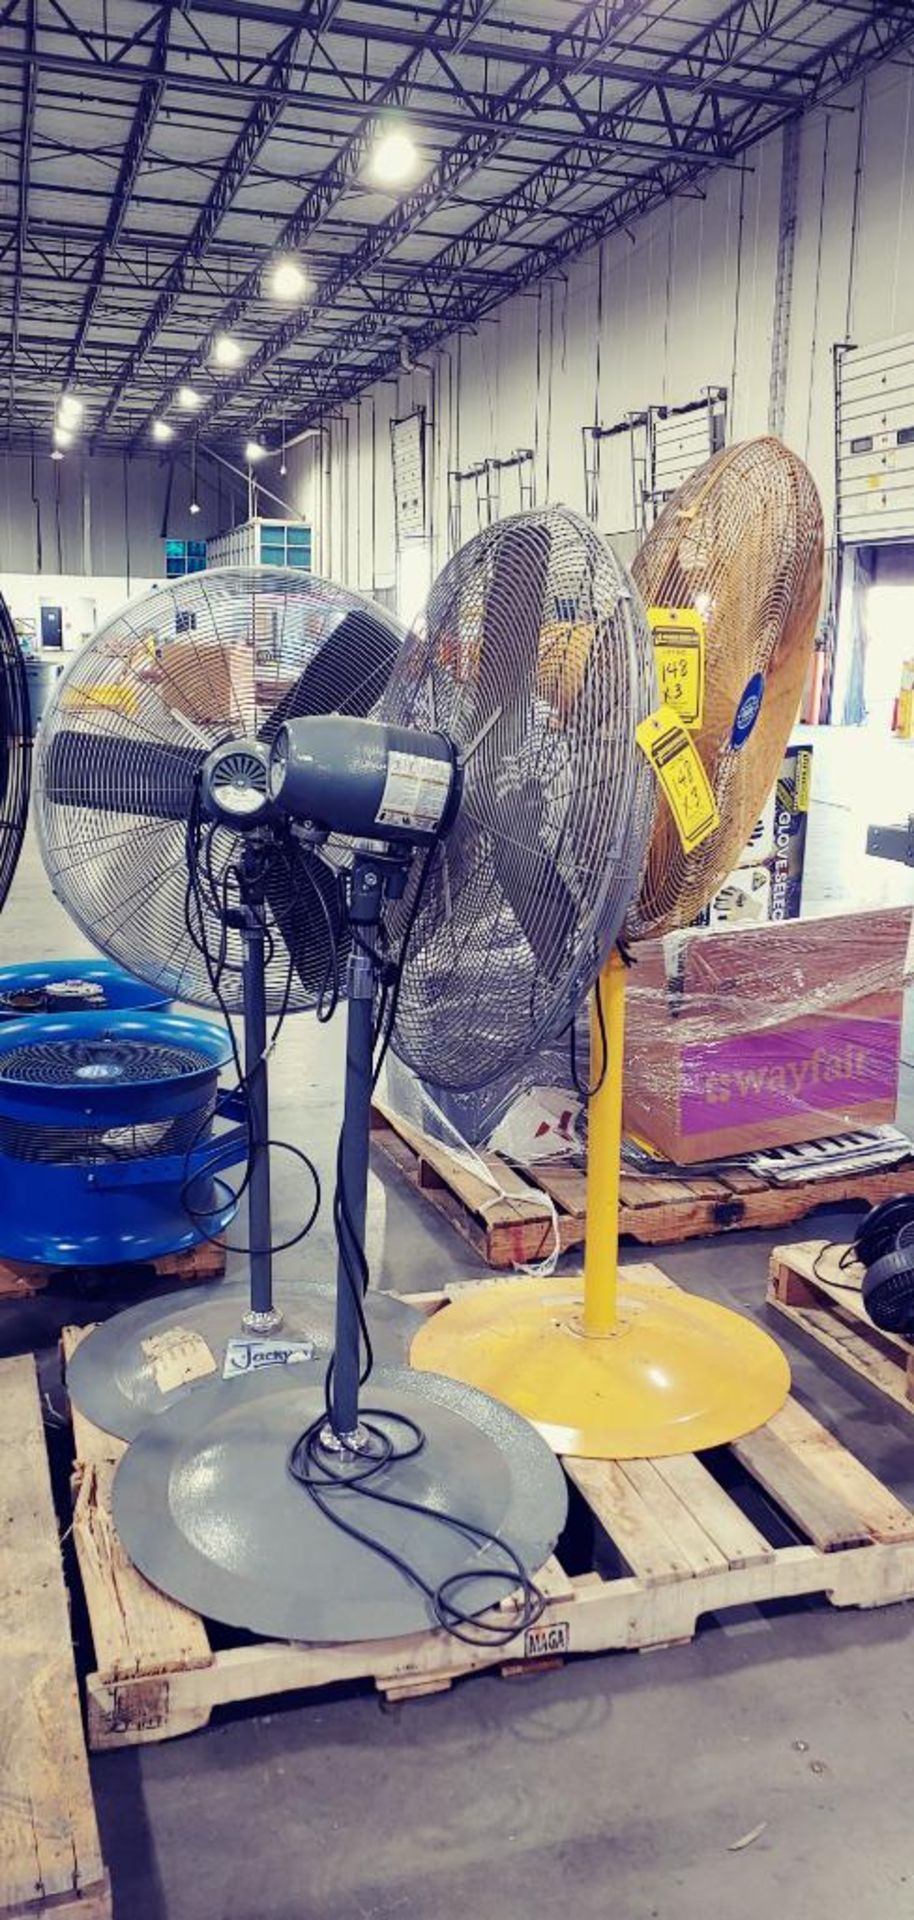 (2x) iLiving 30" Pedestal Fans ($20 Loading Fee Will Be Added To Invoice) - Image 2 of 2